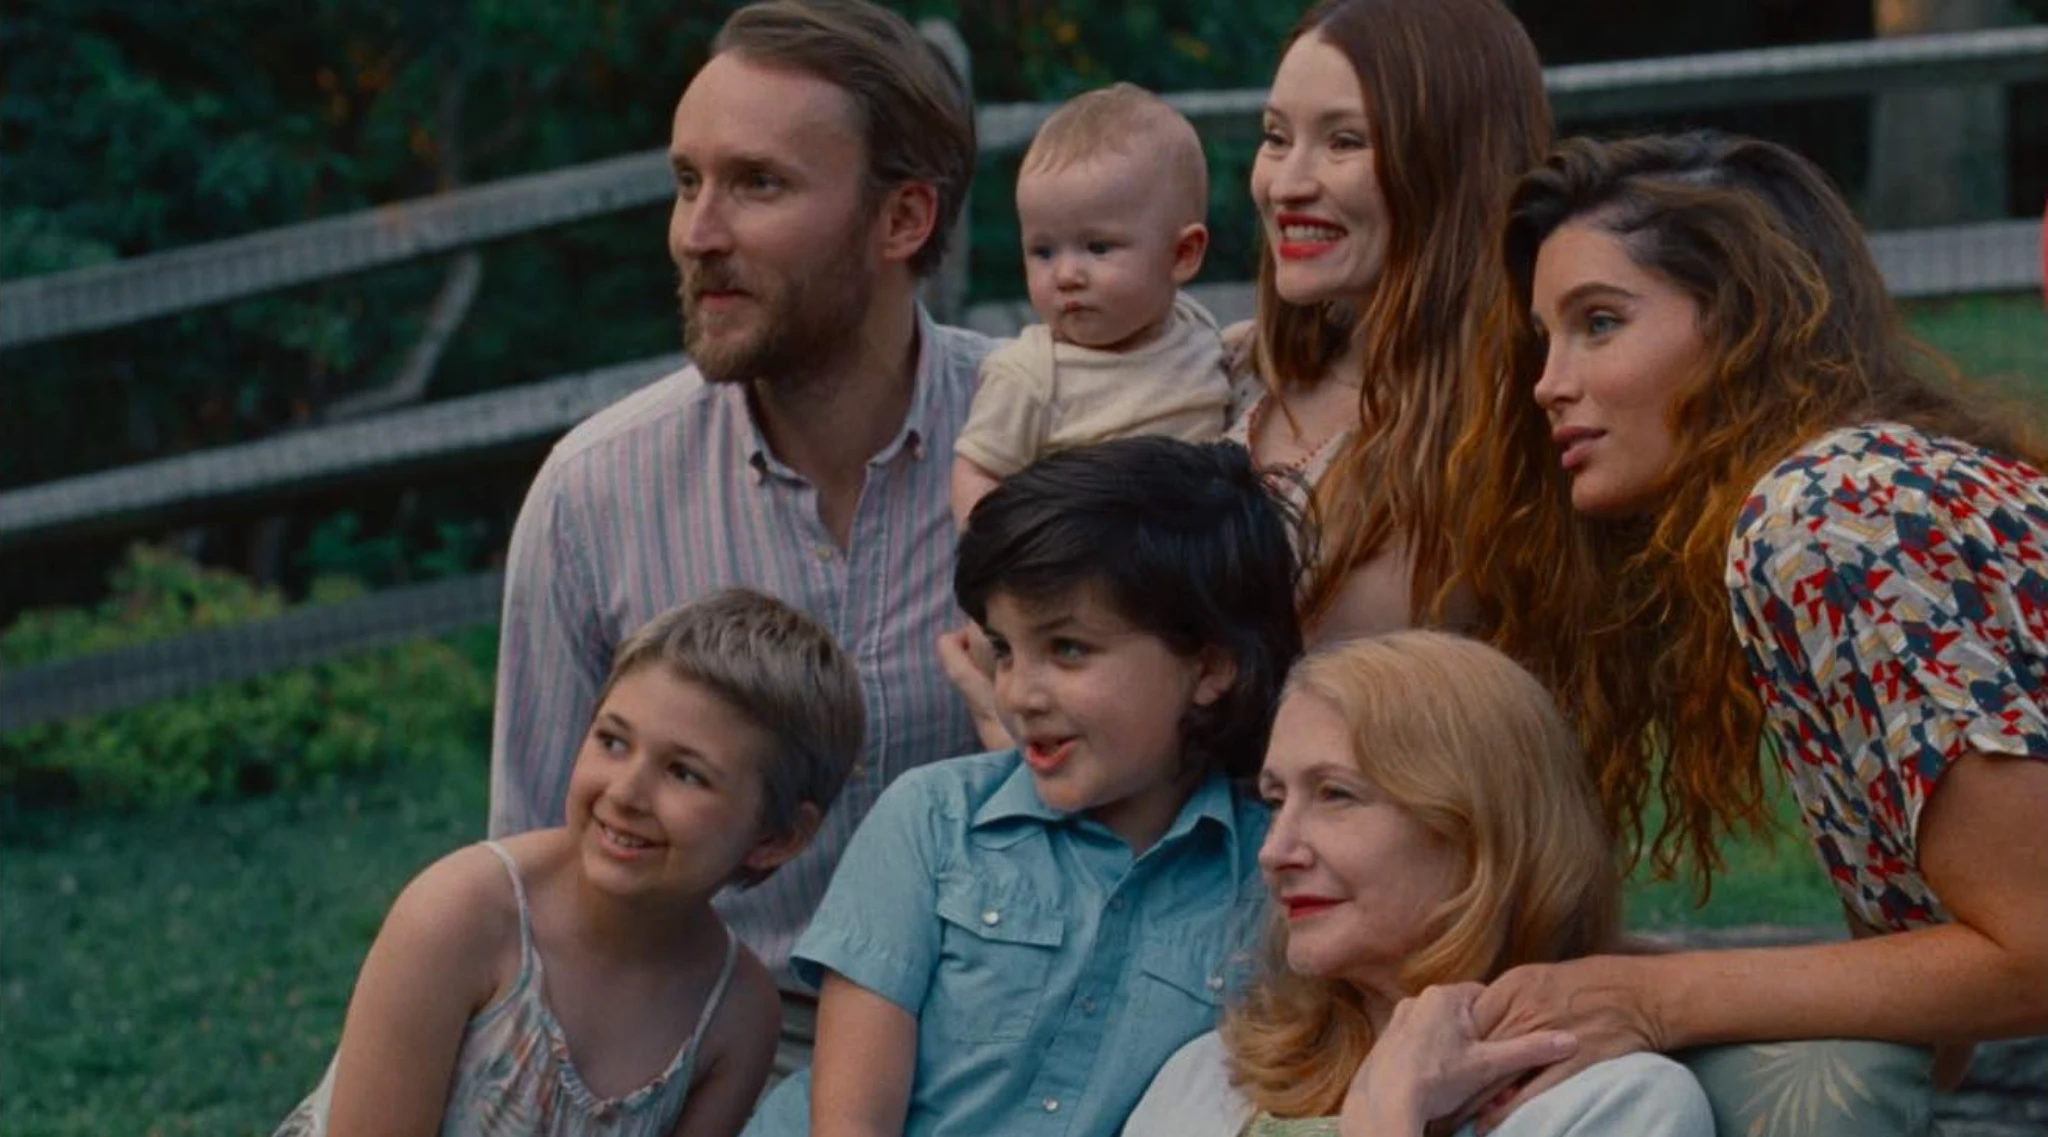 'Monica' Trailer: Trace Lysette and Patricia Clarkson Star in Estranged Mother-Daughter Drama